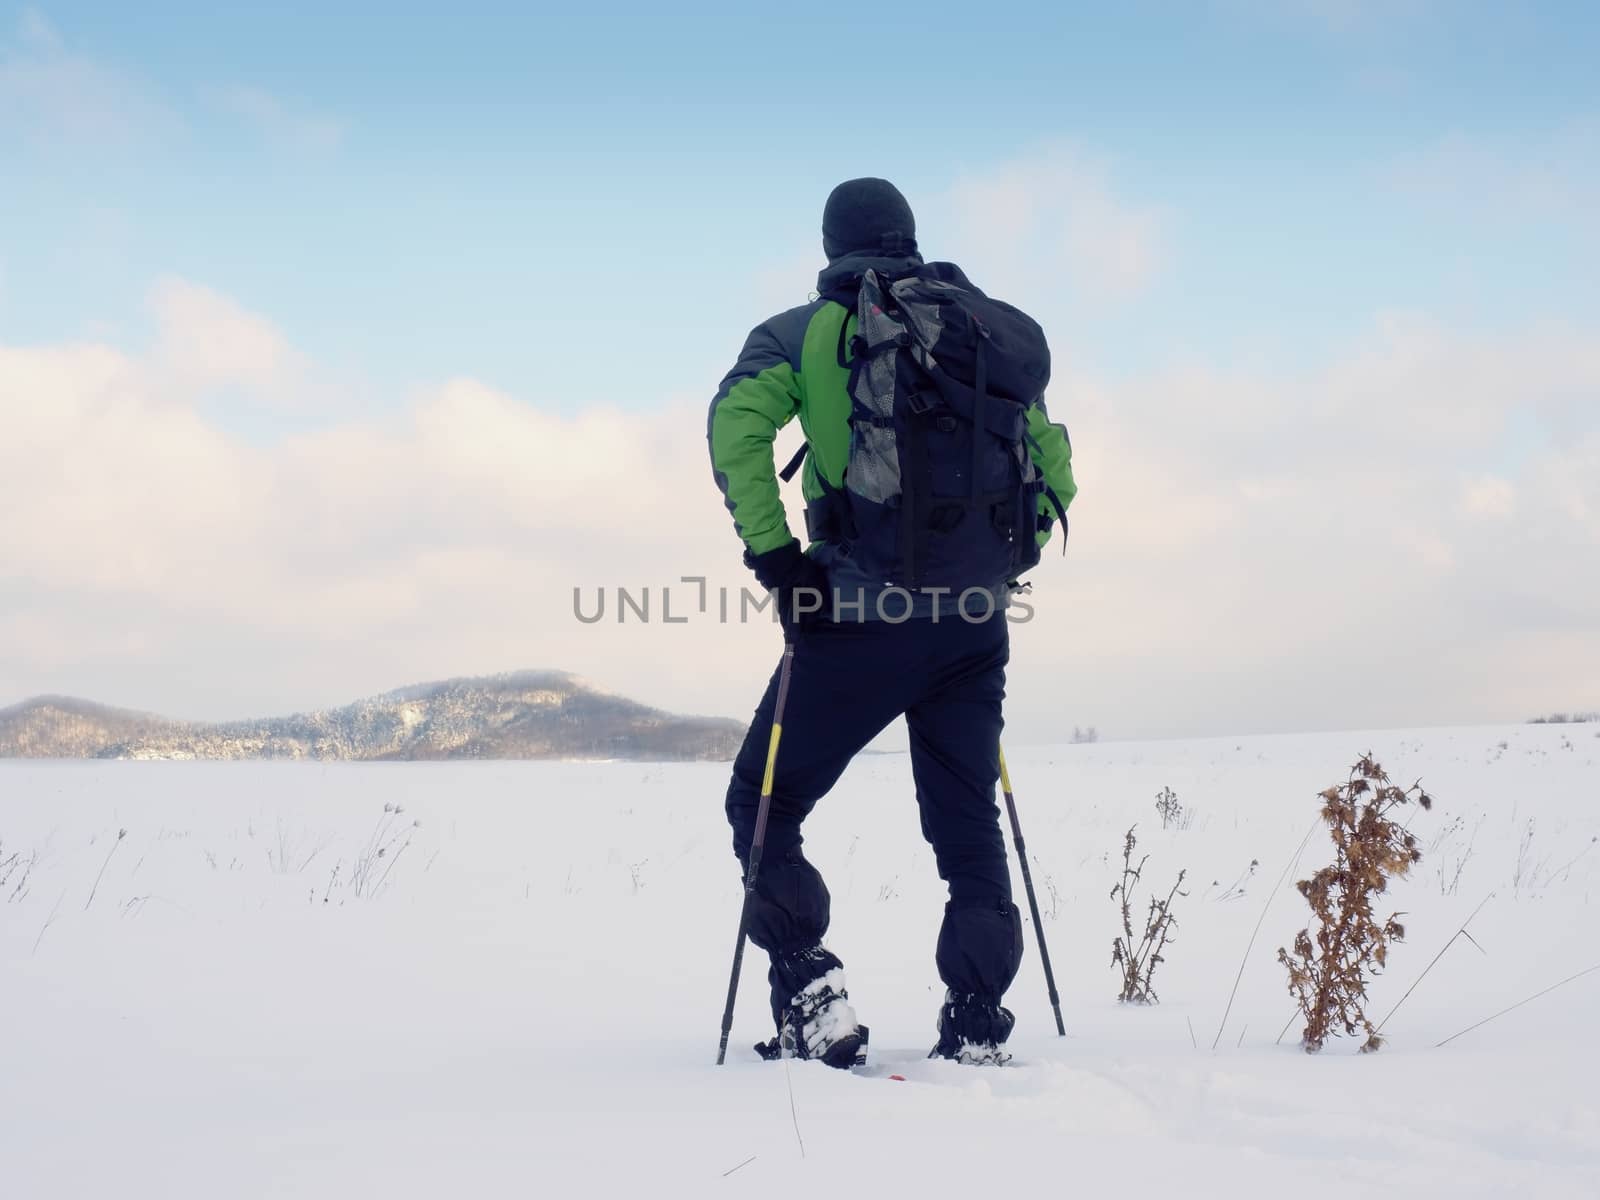 Man with snowshoes walk in snowy filed. Hiker in green gray winter jacket and black trekking trousers snowshoeing in powder snow. Cloudy winter day, gentle wind brings small snow flakes 